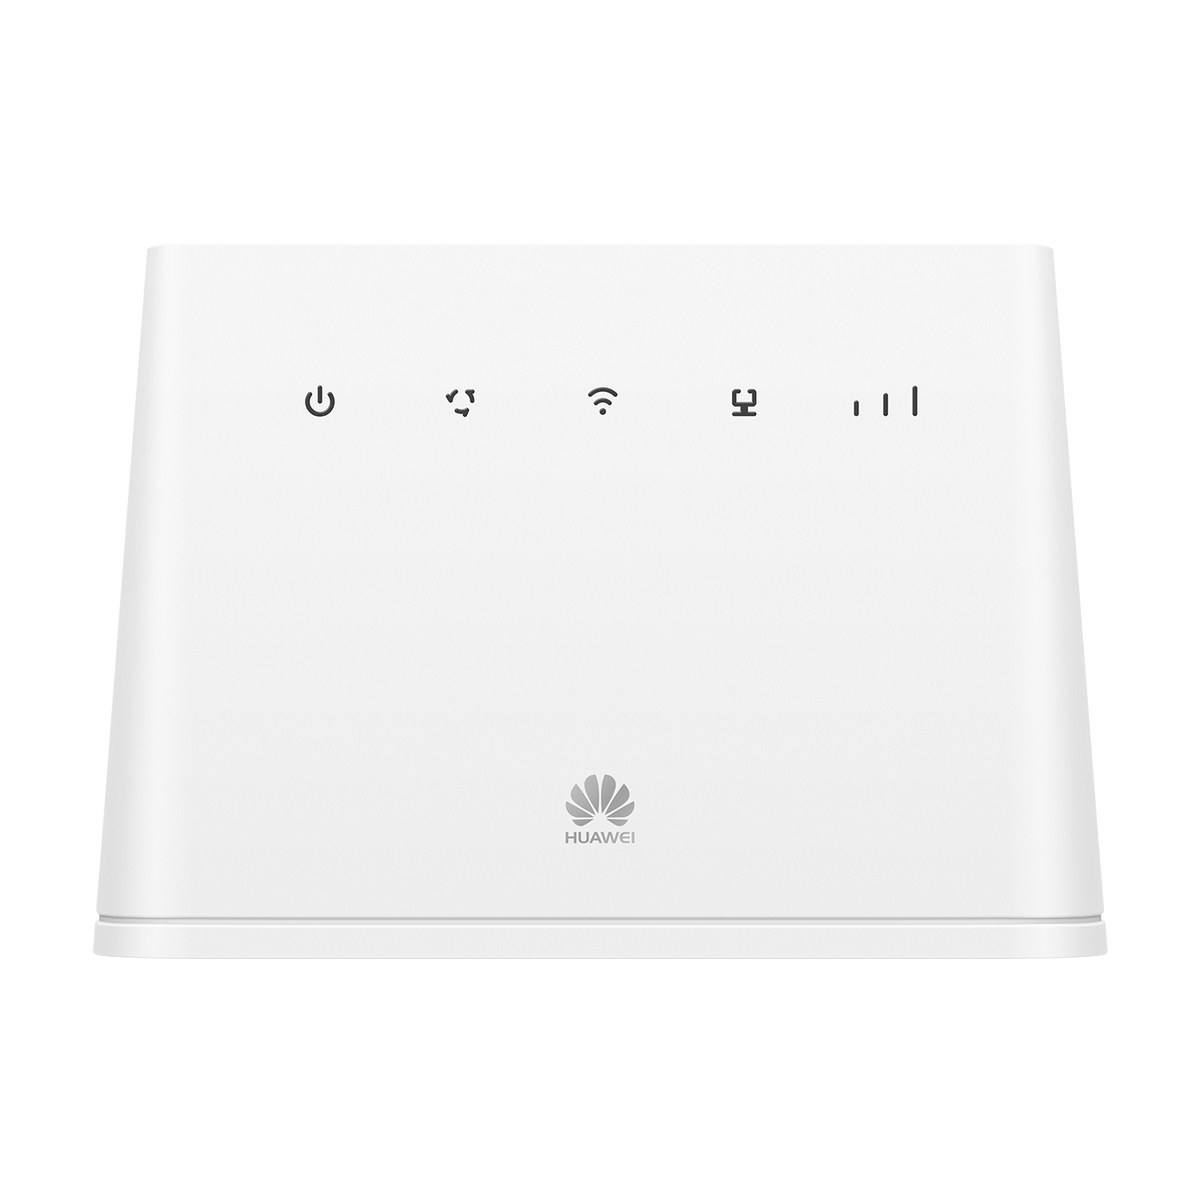 HUAWEI B311S-221 STAT LTE 150MBPS 150 DL 4G CAT4 ROUTER WHITE Router Mbit/s